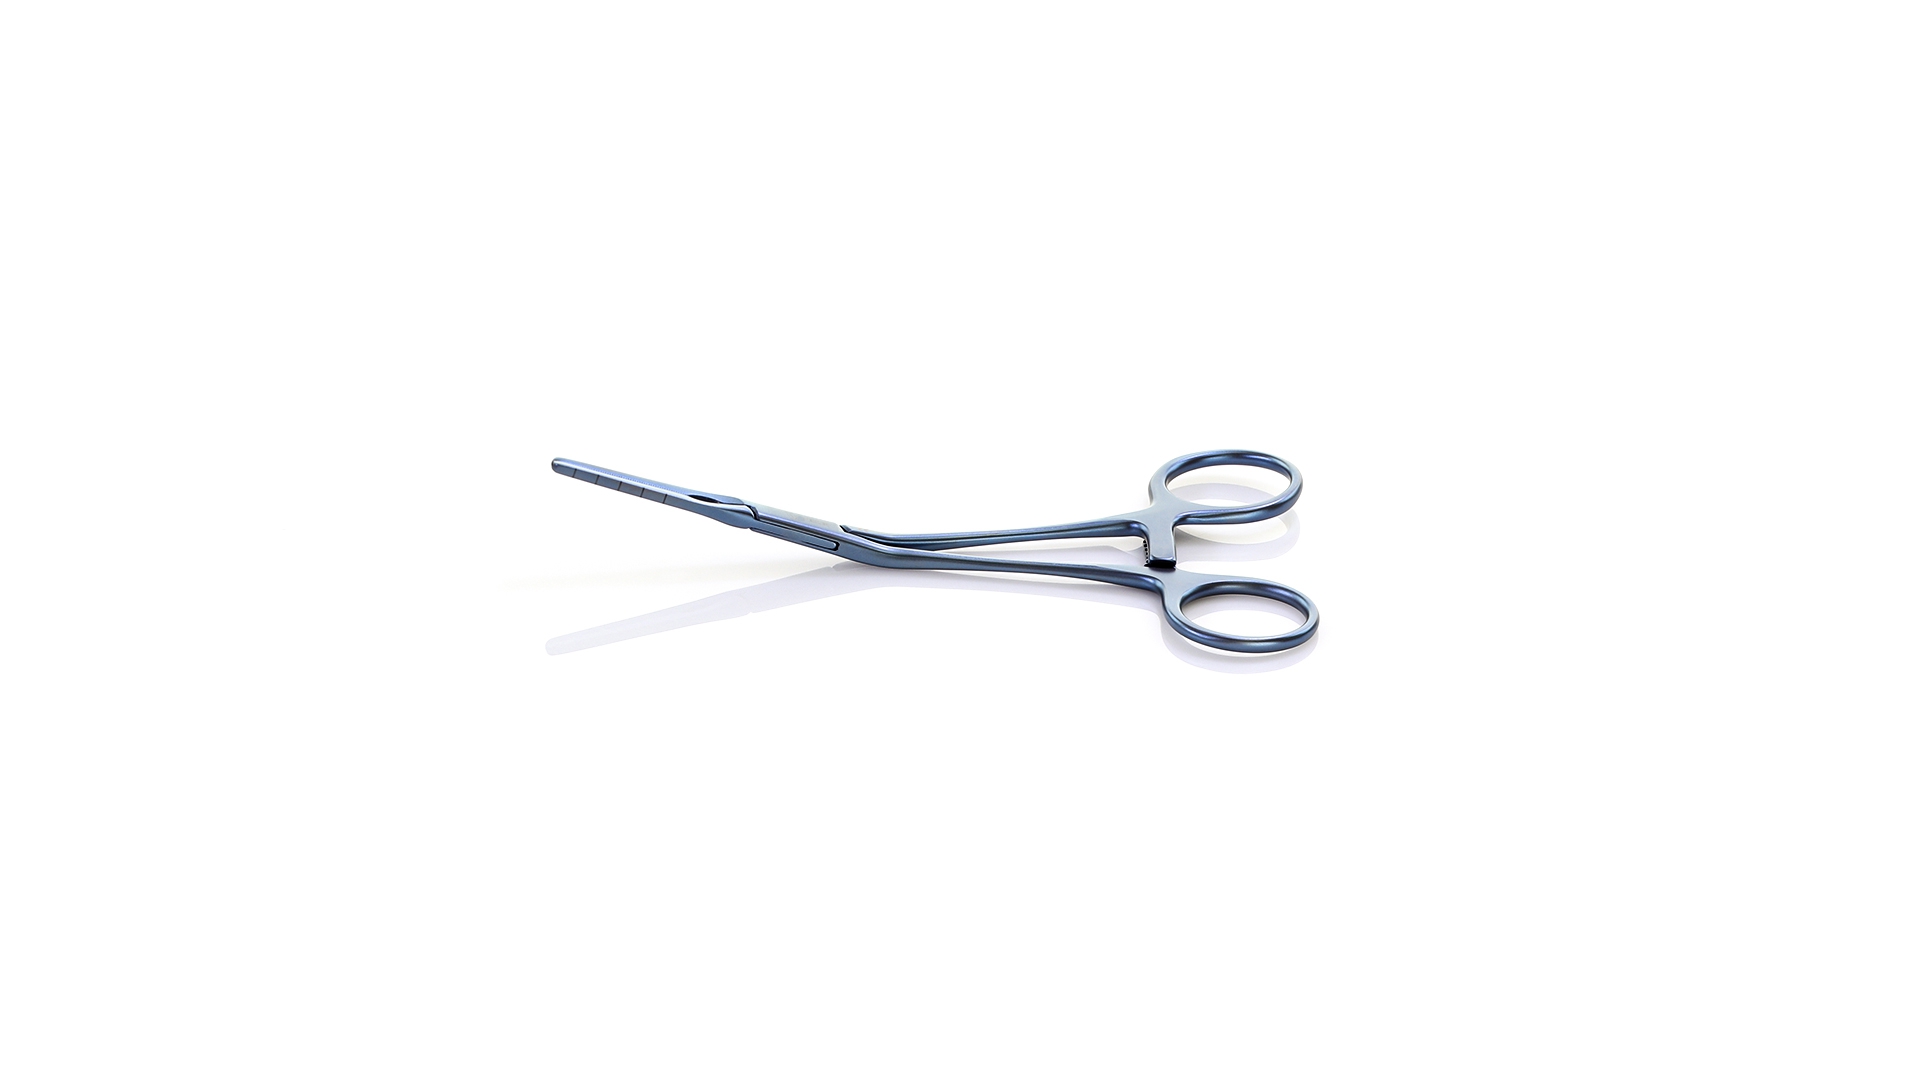 Cooley Pediatric Clamp - 30mm straight Cooley Atraumatic jaws